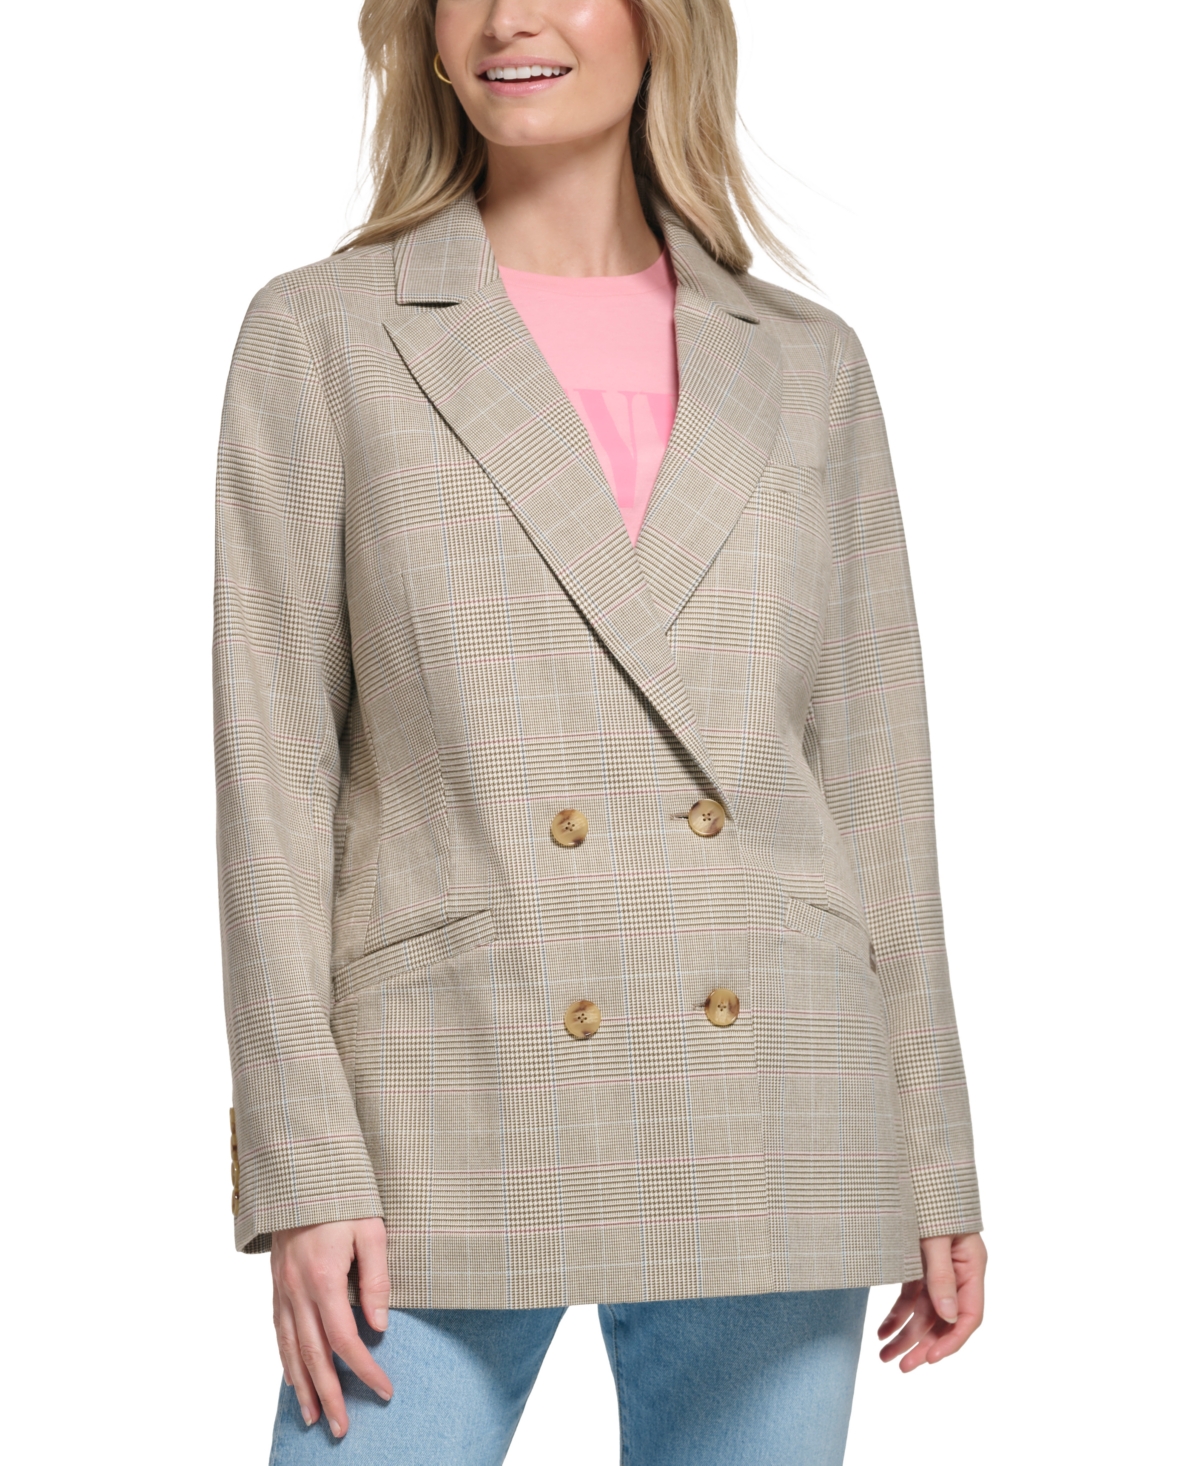 Levi's Women's Double-Breasted Lined Printed Blazer